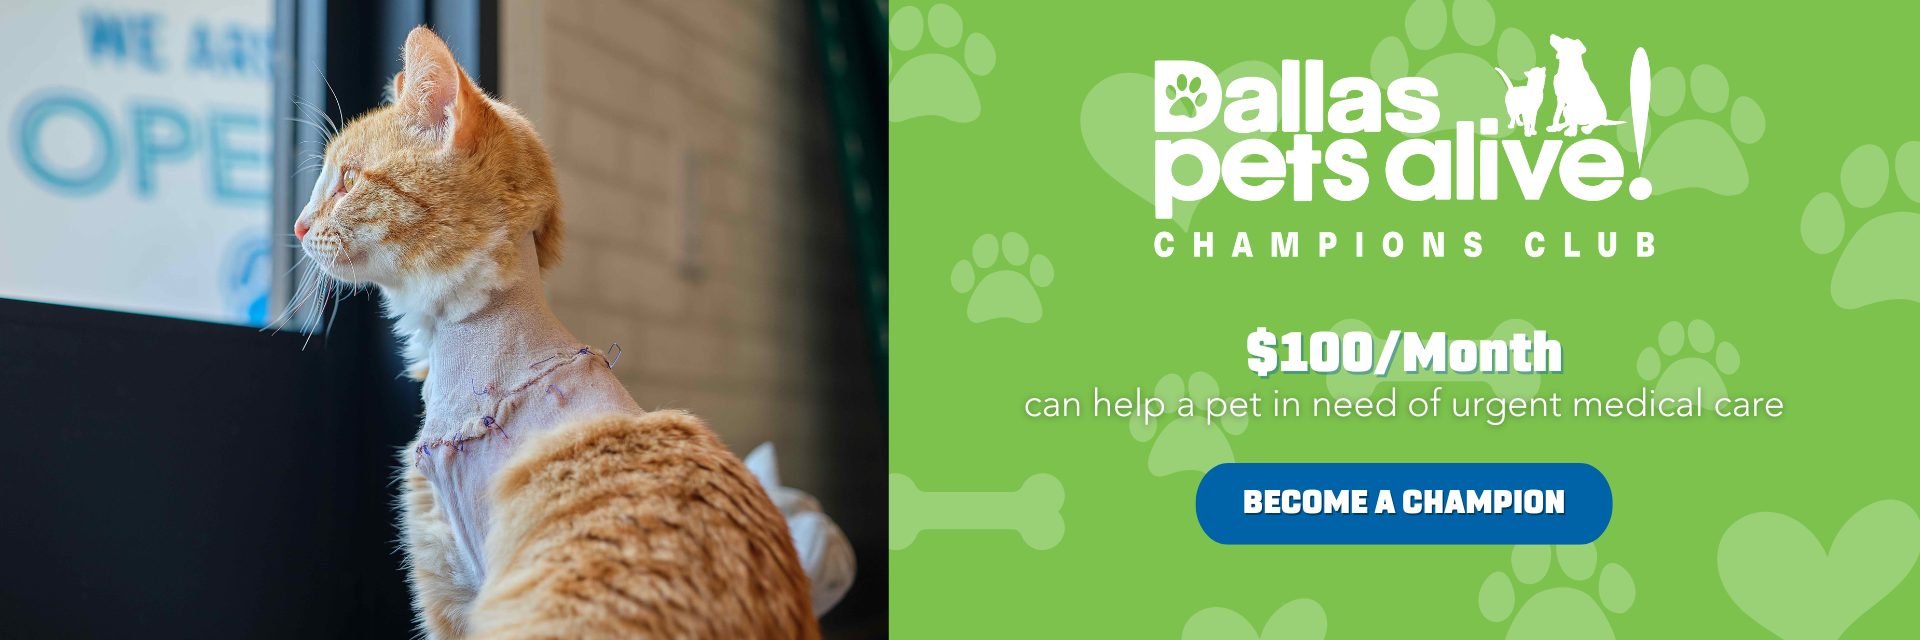 $100/month can help a pet in need of urgent medical care